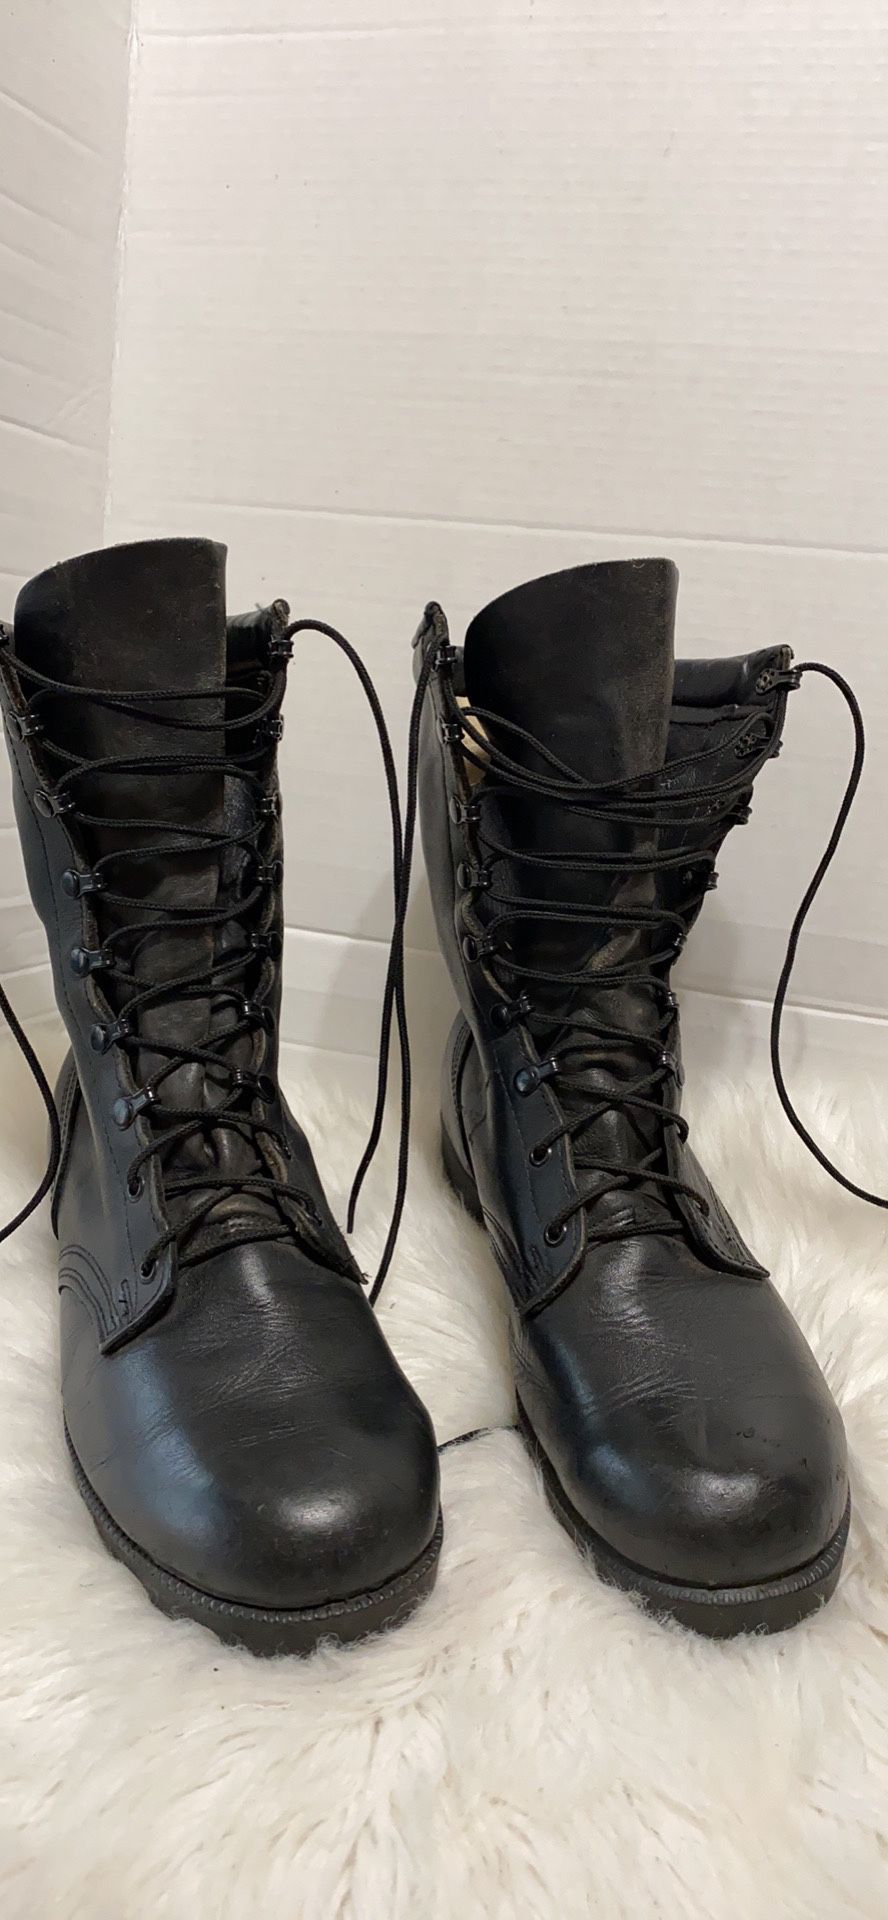 Men work army boots size 10 wide